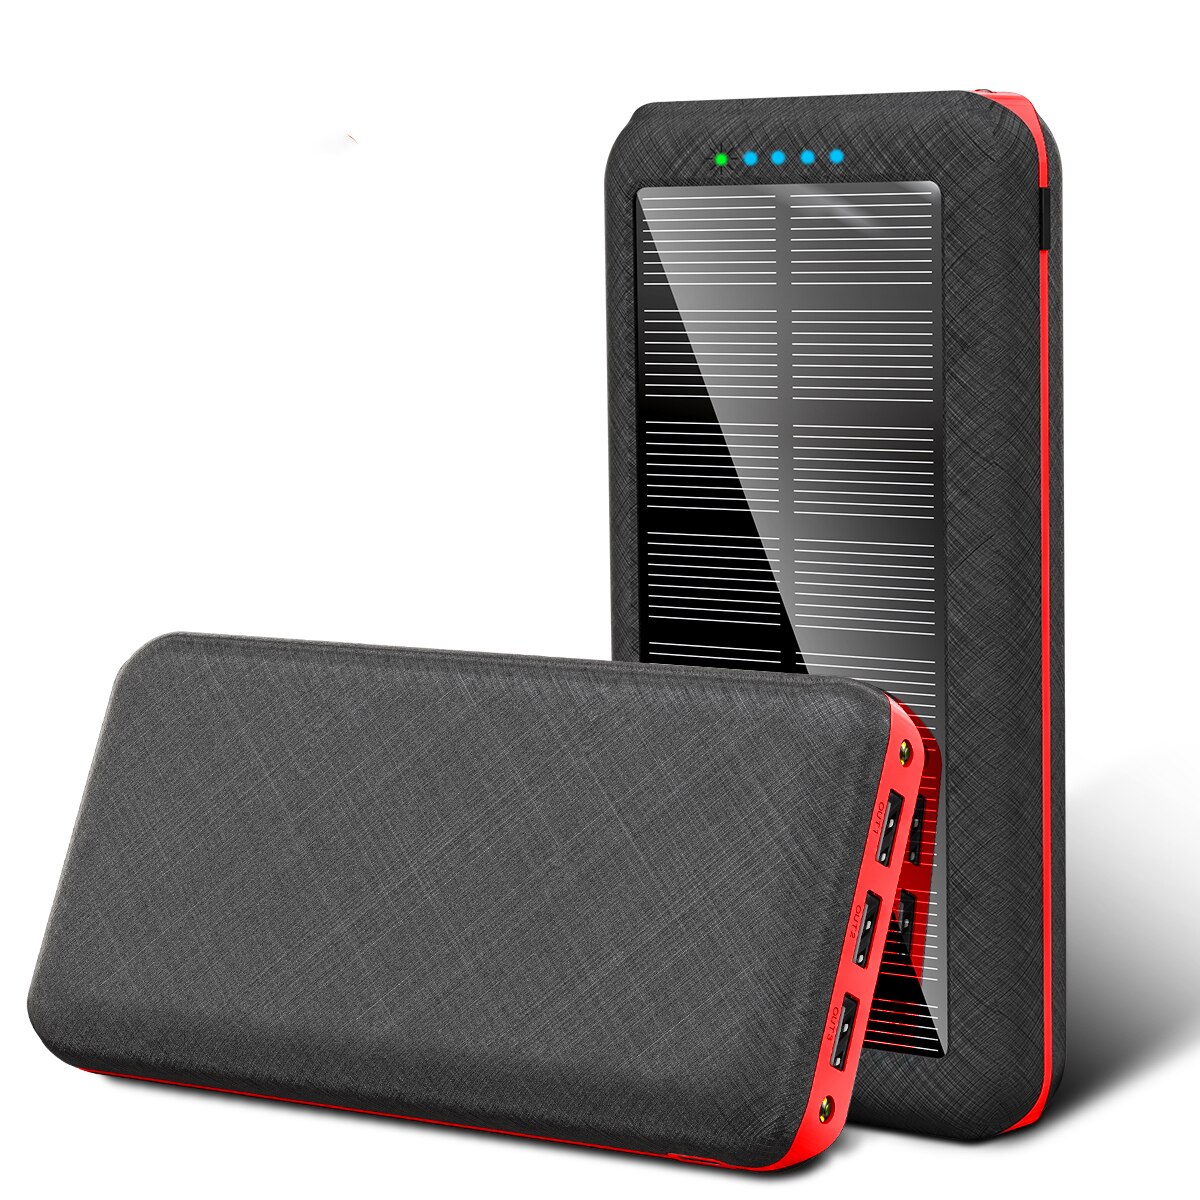 80000mAh Qi Wireless Solar Power Bank for Xiaomi Samsung Iphone Portable Charger 3USB Phone Charger Outdoor Travel PowerBank: Wireless red